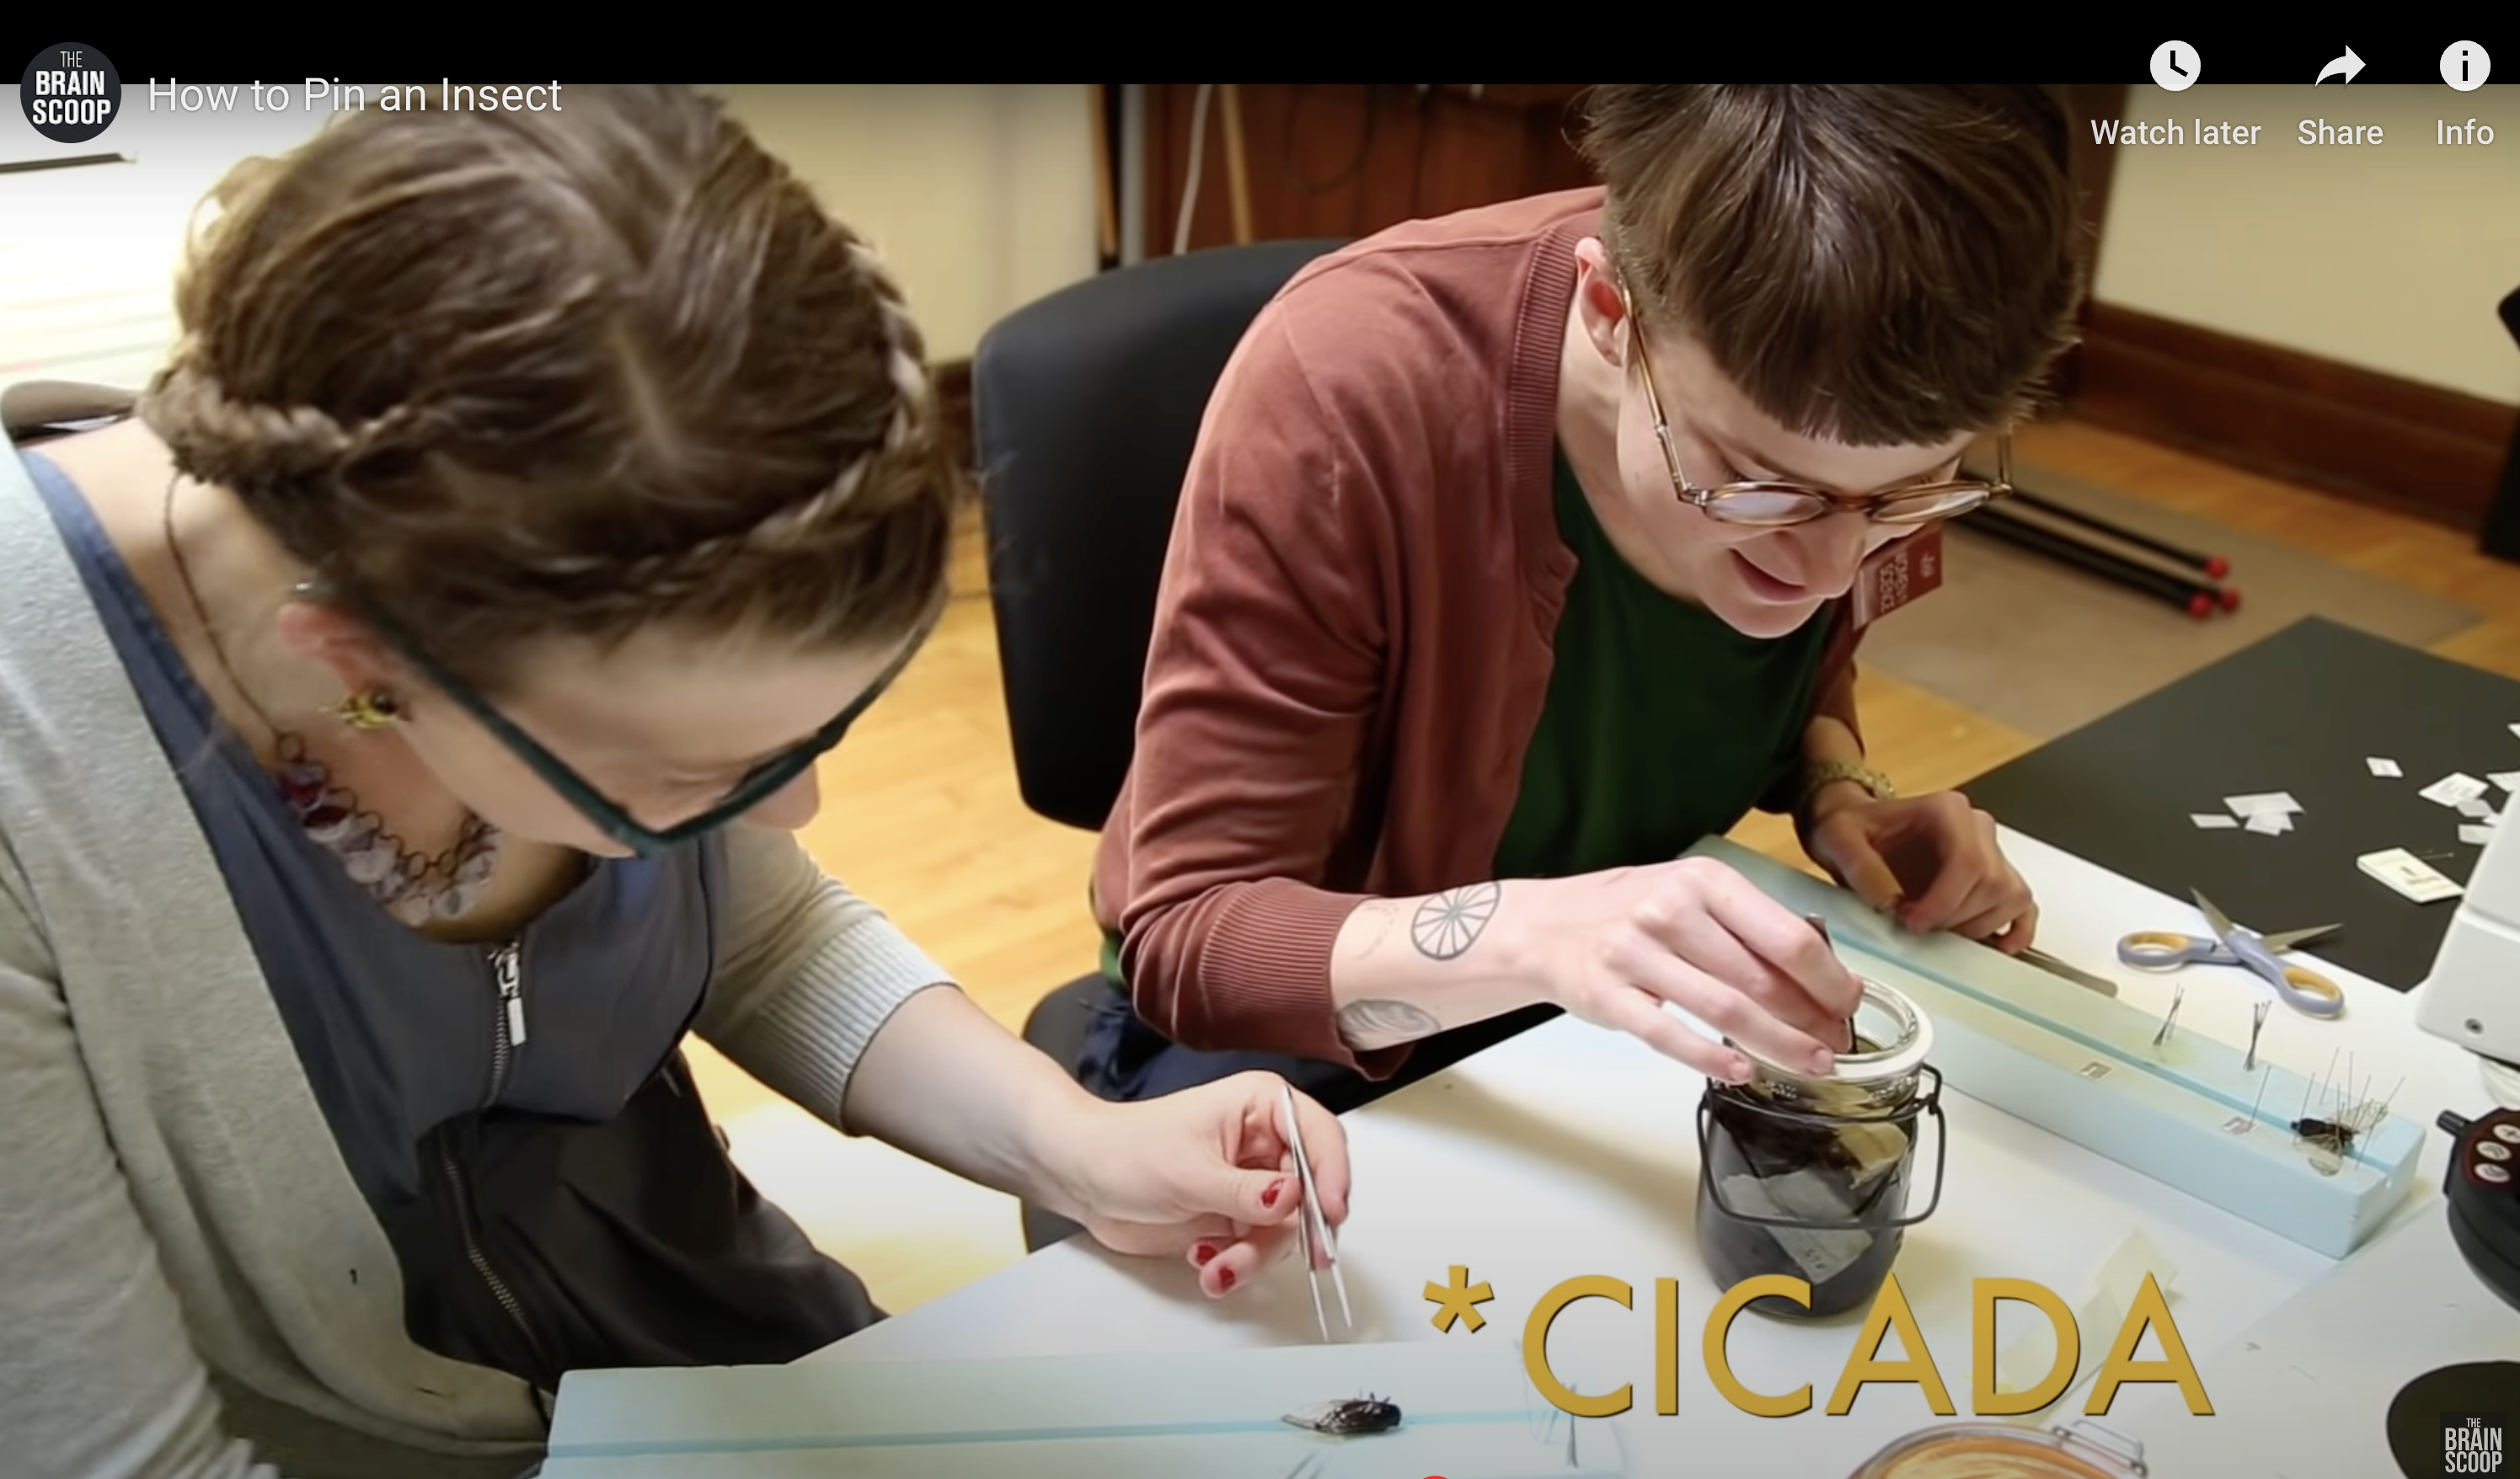 two people working with insect specimens